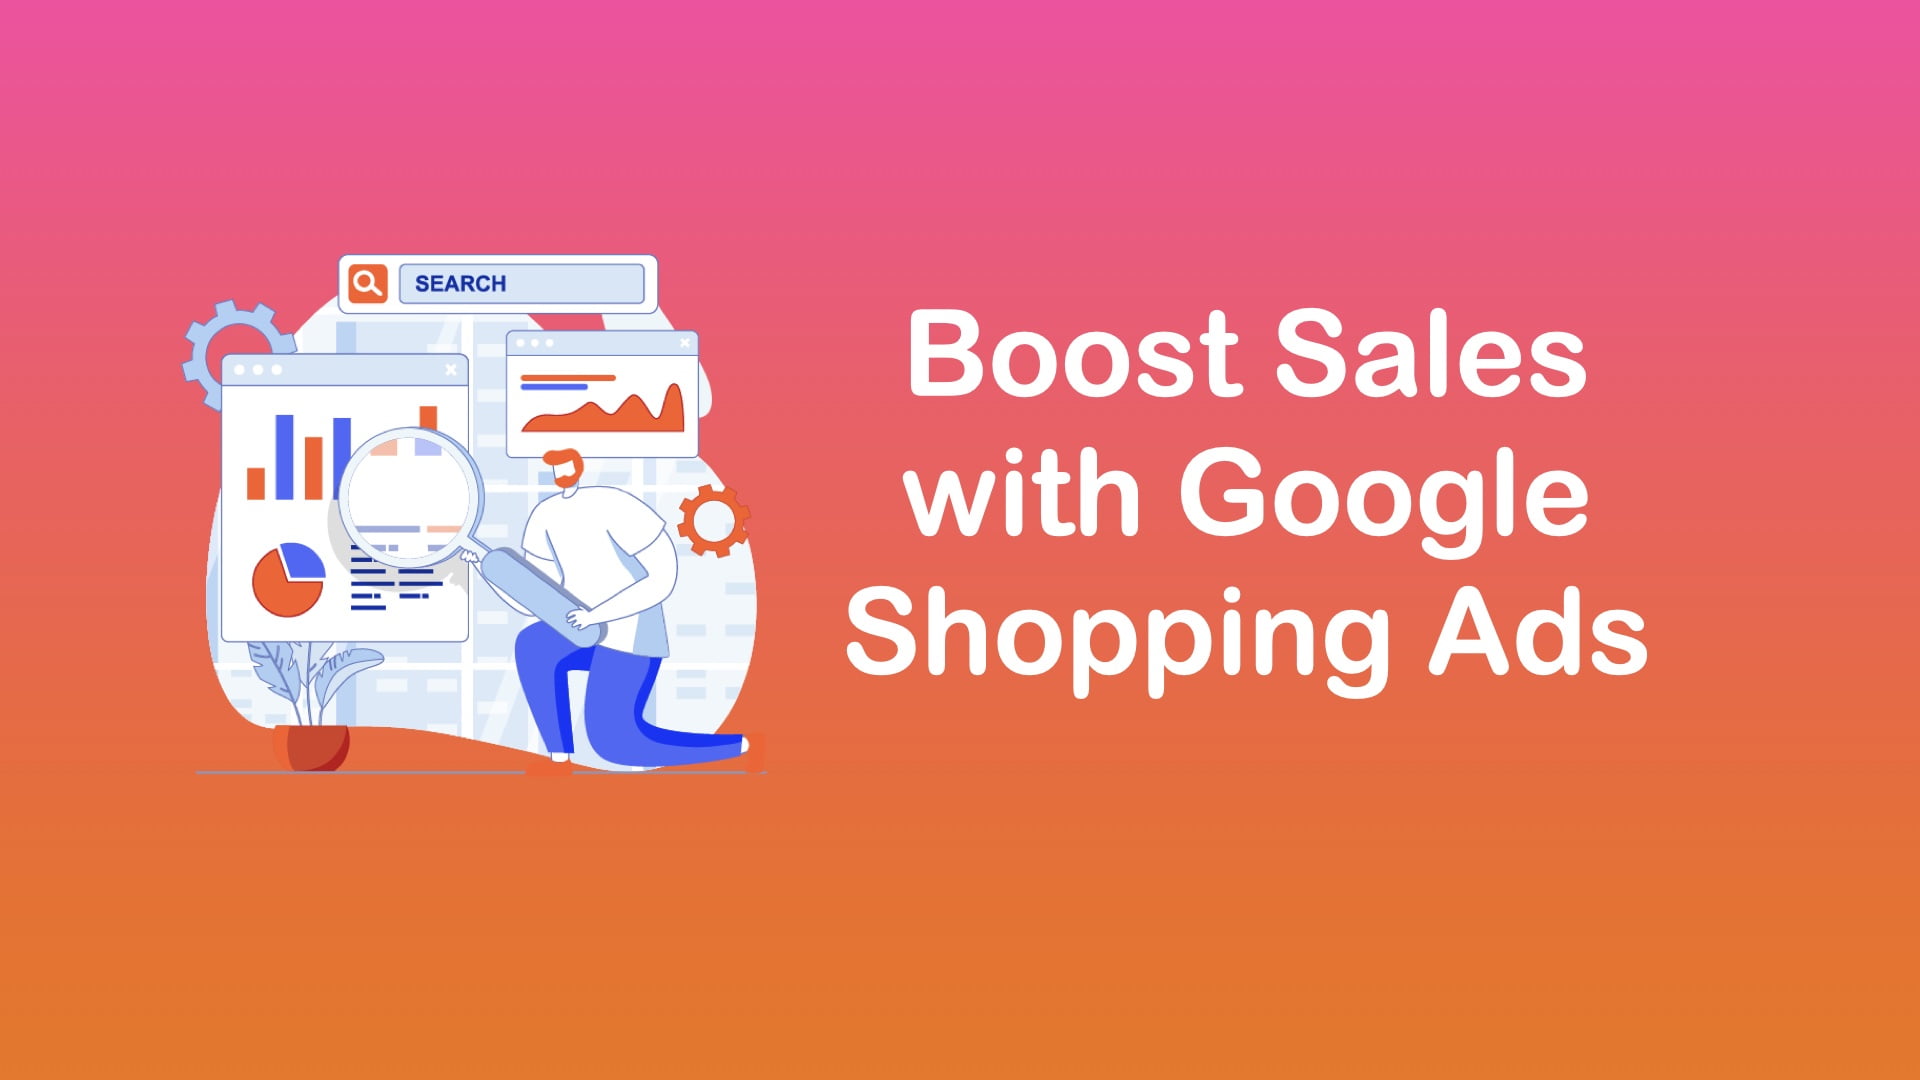 effective strategies to drive sales and maximize revenue with Google Shopping Ads.